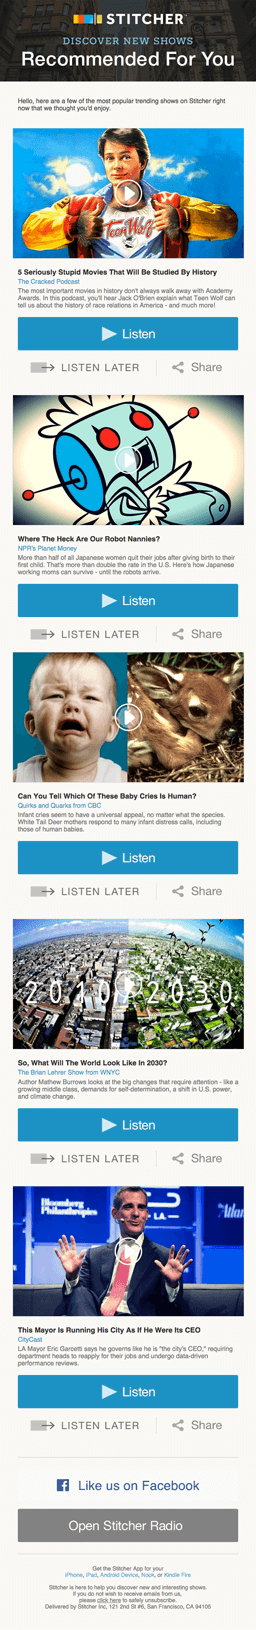 stitcher-email-example?noresize